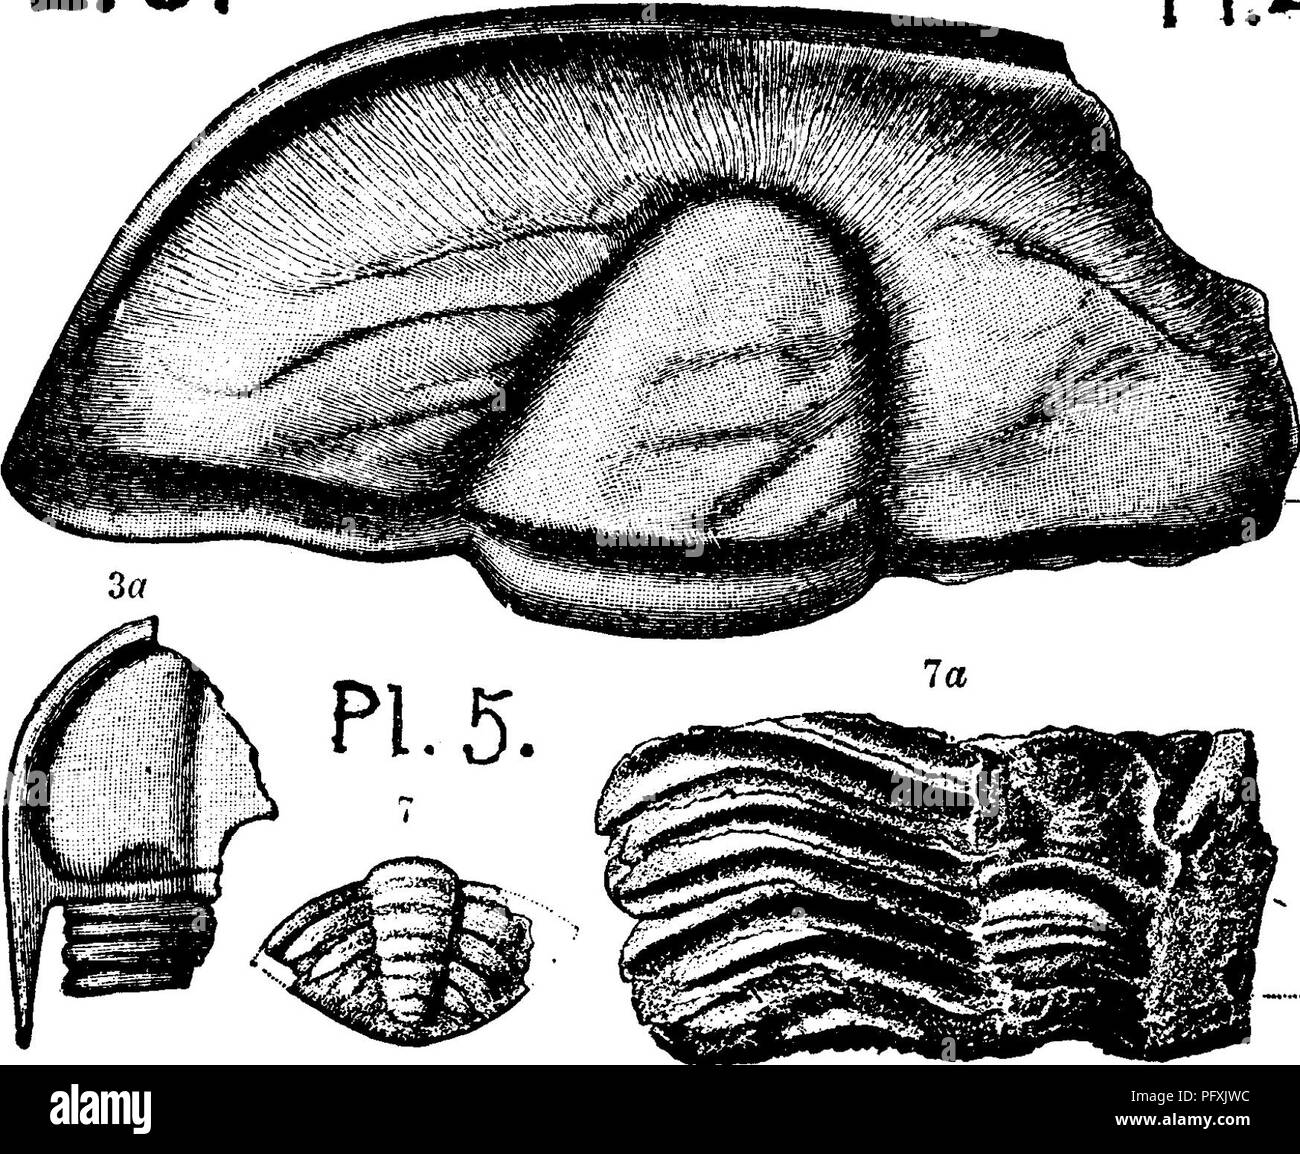 . A dictionary of the fossils of Pennsylvania and neighboring states named in the reports and catalogues of the survey ... Paleontology. 141 CONO. Conocephalites chippewaensis. Owen. See Lonchoceph- alus chippeivaensis. Potsdam form. L Conecophalites elegans. See Conocoryphe elegans. M. G, Conocephalites formosus. See Ptychoparia robbi. M. G. Gonocephalites gemini-spinosus. See Conocoryphe mat- thewi. M. G See foot note to page 1S4^ ahove. Gonocephalites hamulus. See Lonchocephalus hamulus. Potsdam formation. I, Gonocephalites halli. See Ptychoparia orestes. L. G. Gonocephalites matthewi. See  Stock Photo